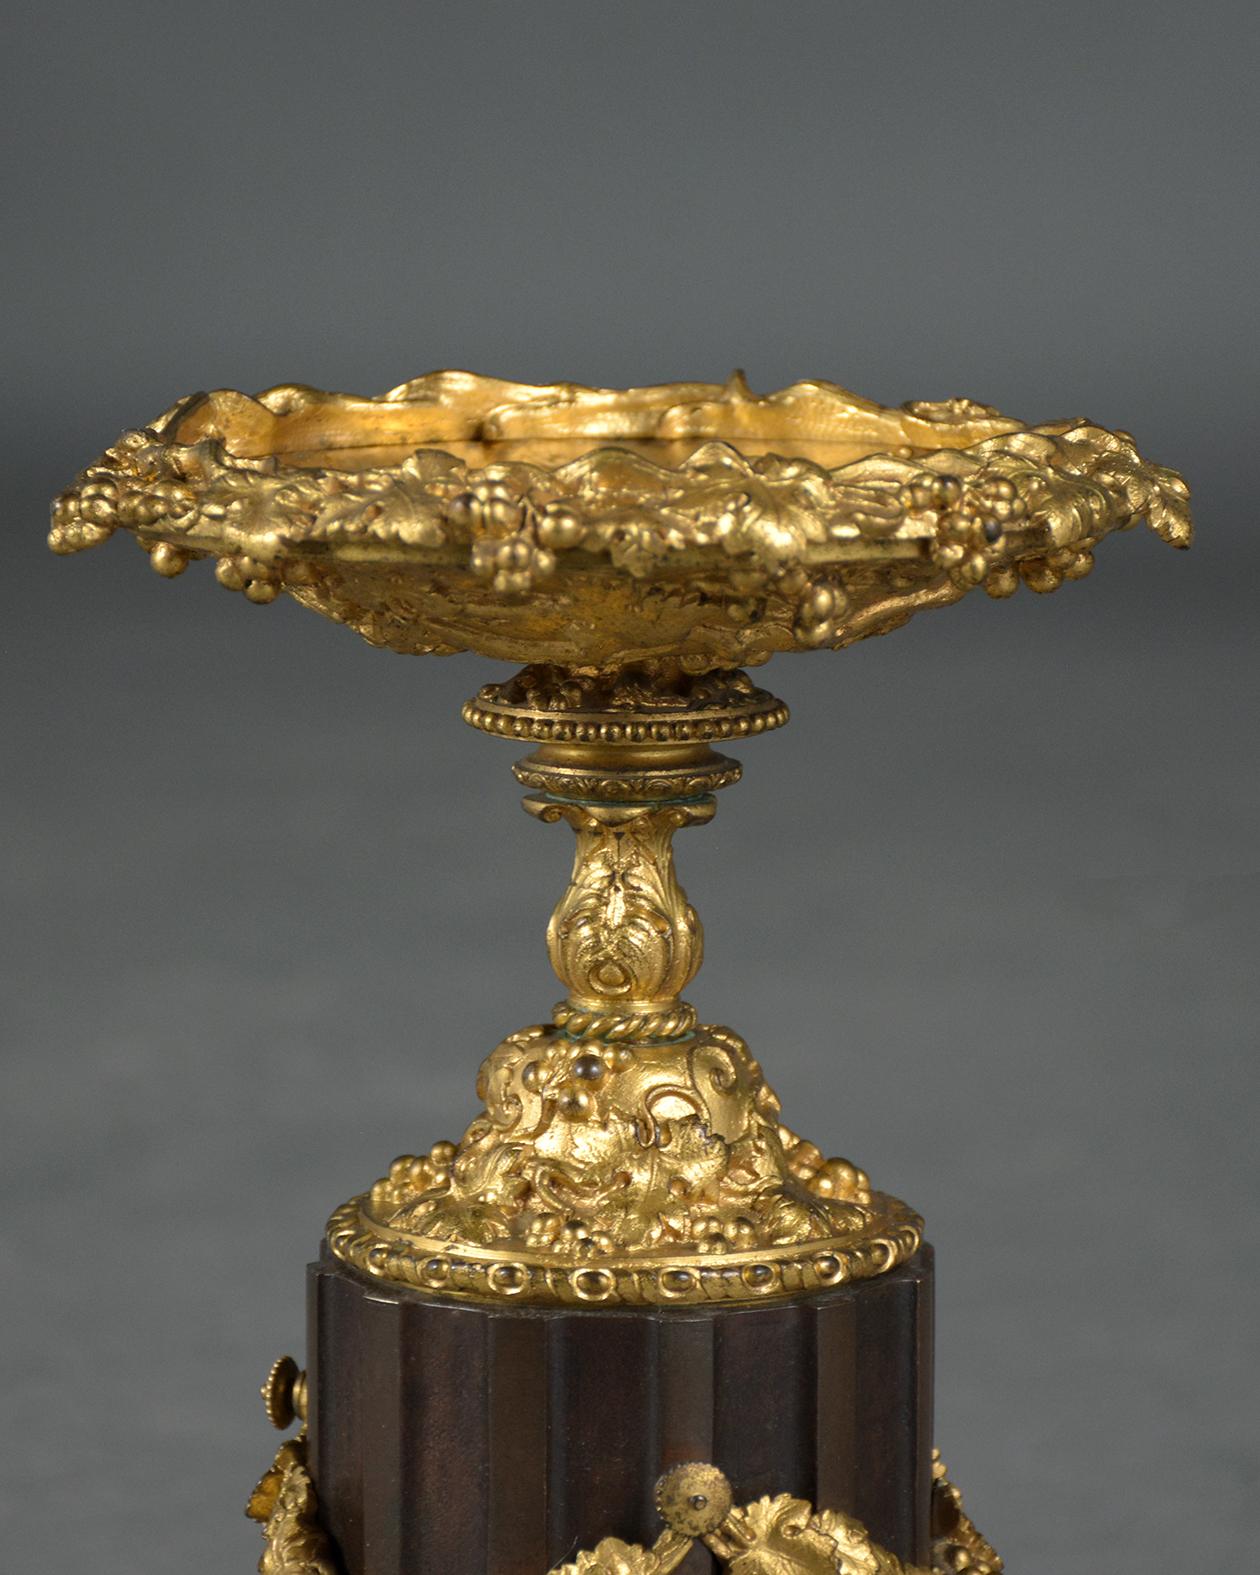 Brass Early 19th-Century French Bronzed Urns with Gold-Plated Garland Decoration For Sale